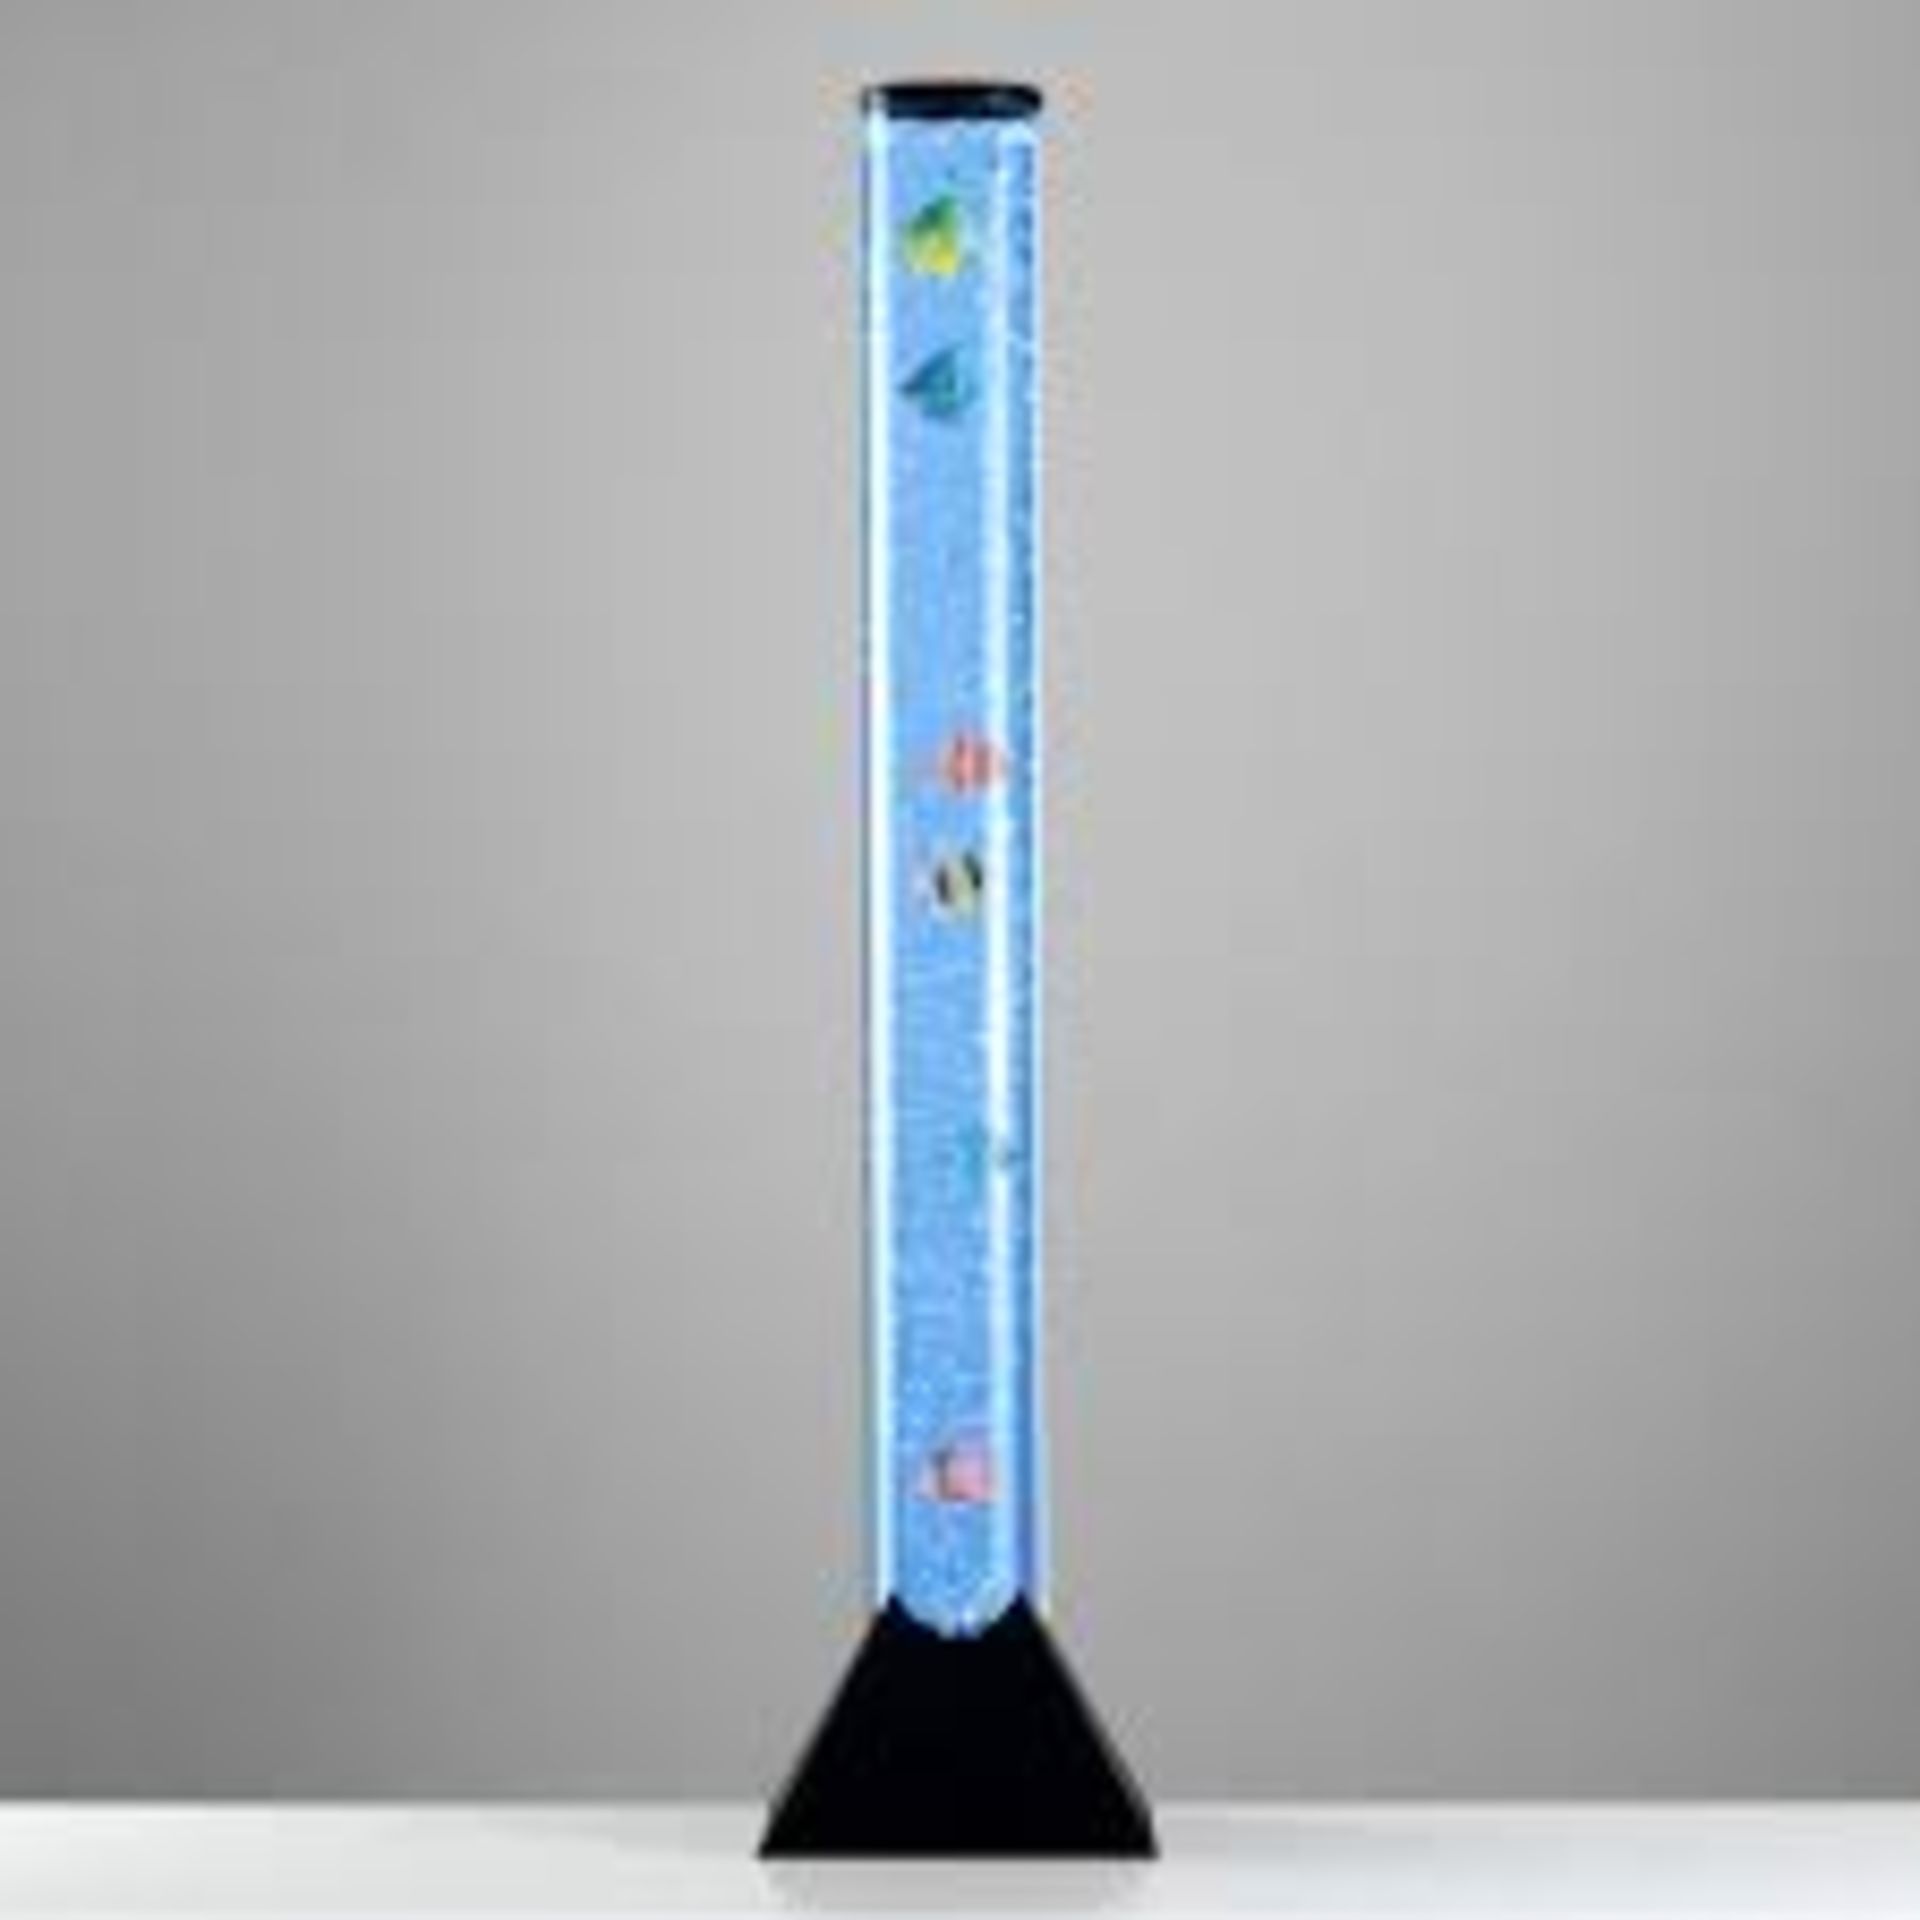 Boxed Jonael Floor Standing Lamp RRP £65 (18360) (Pictures Are For Illustration Purposes Only) (